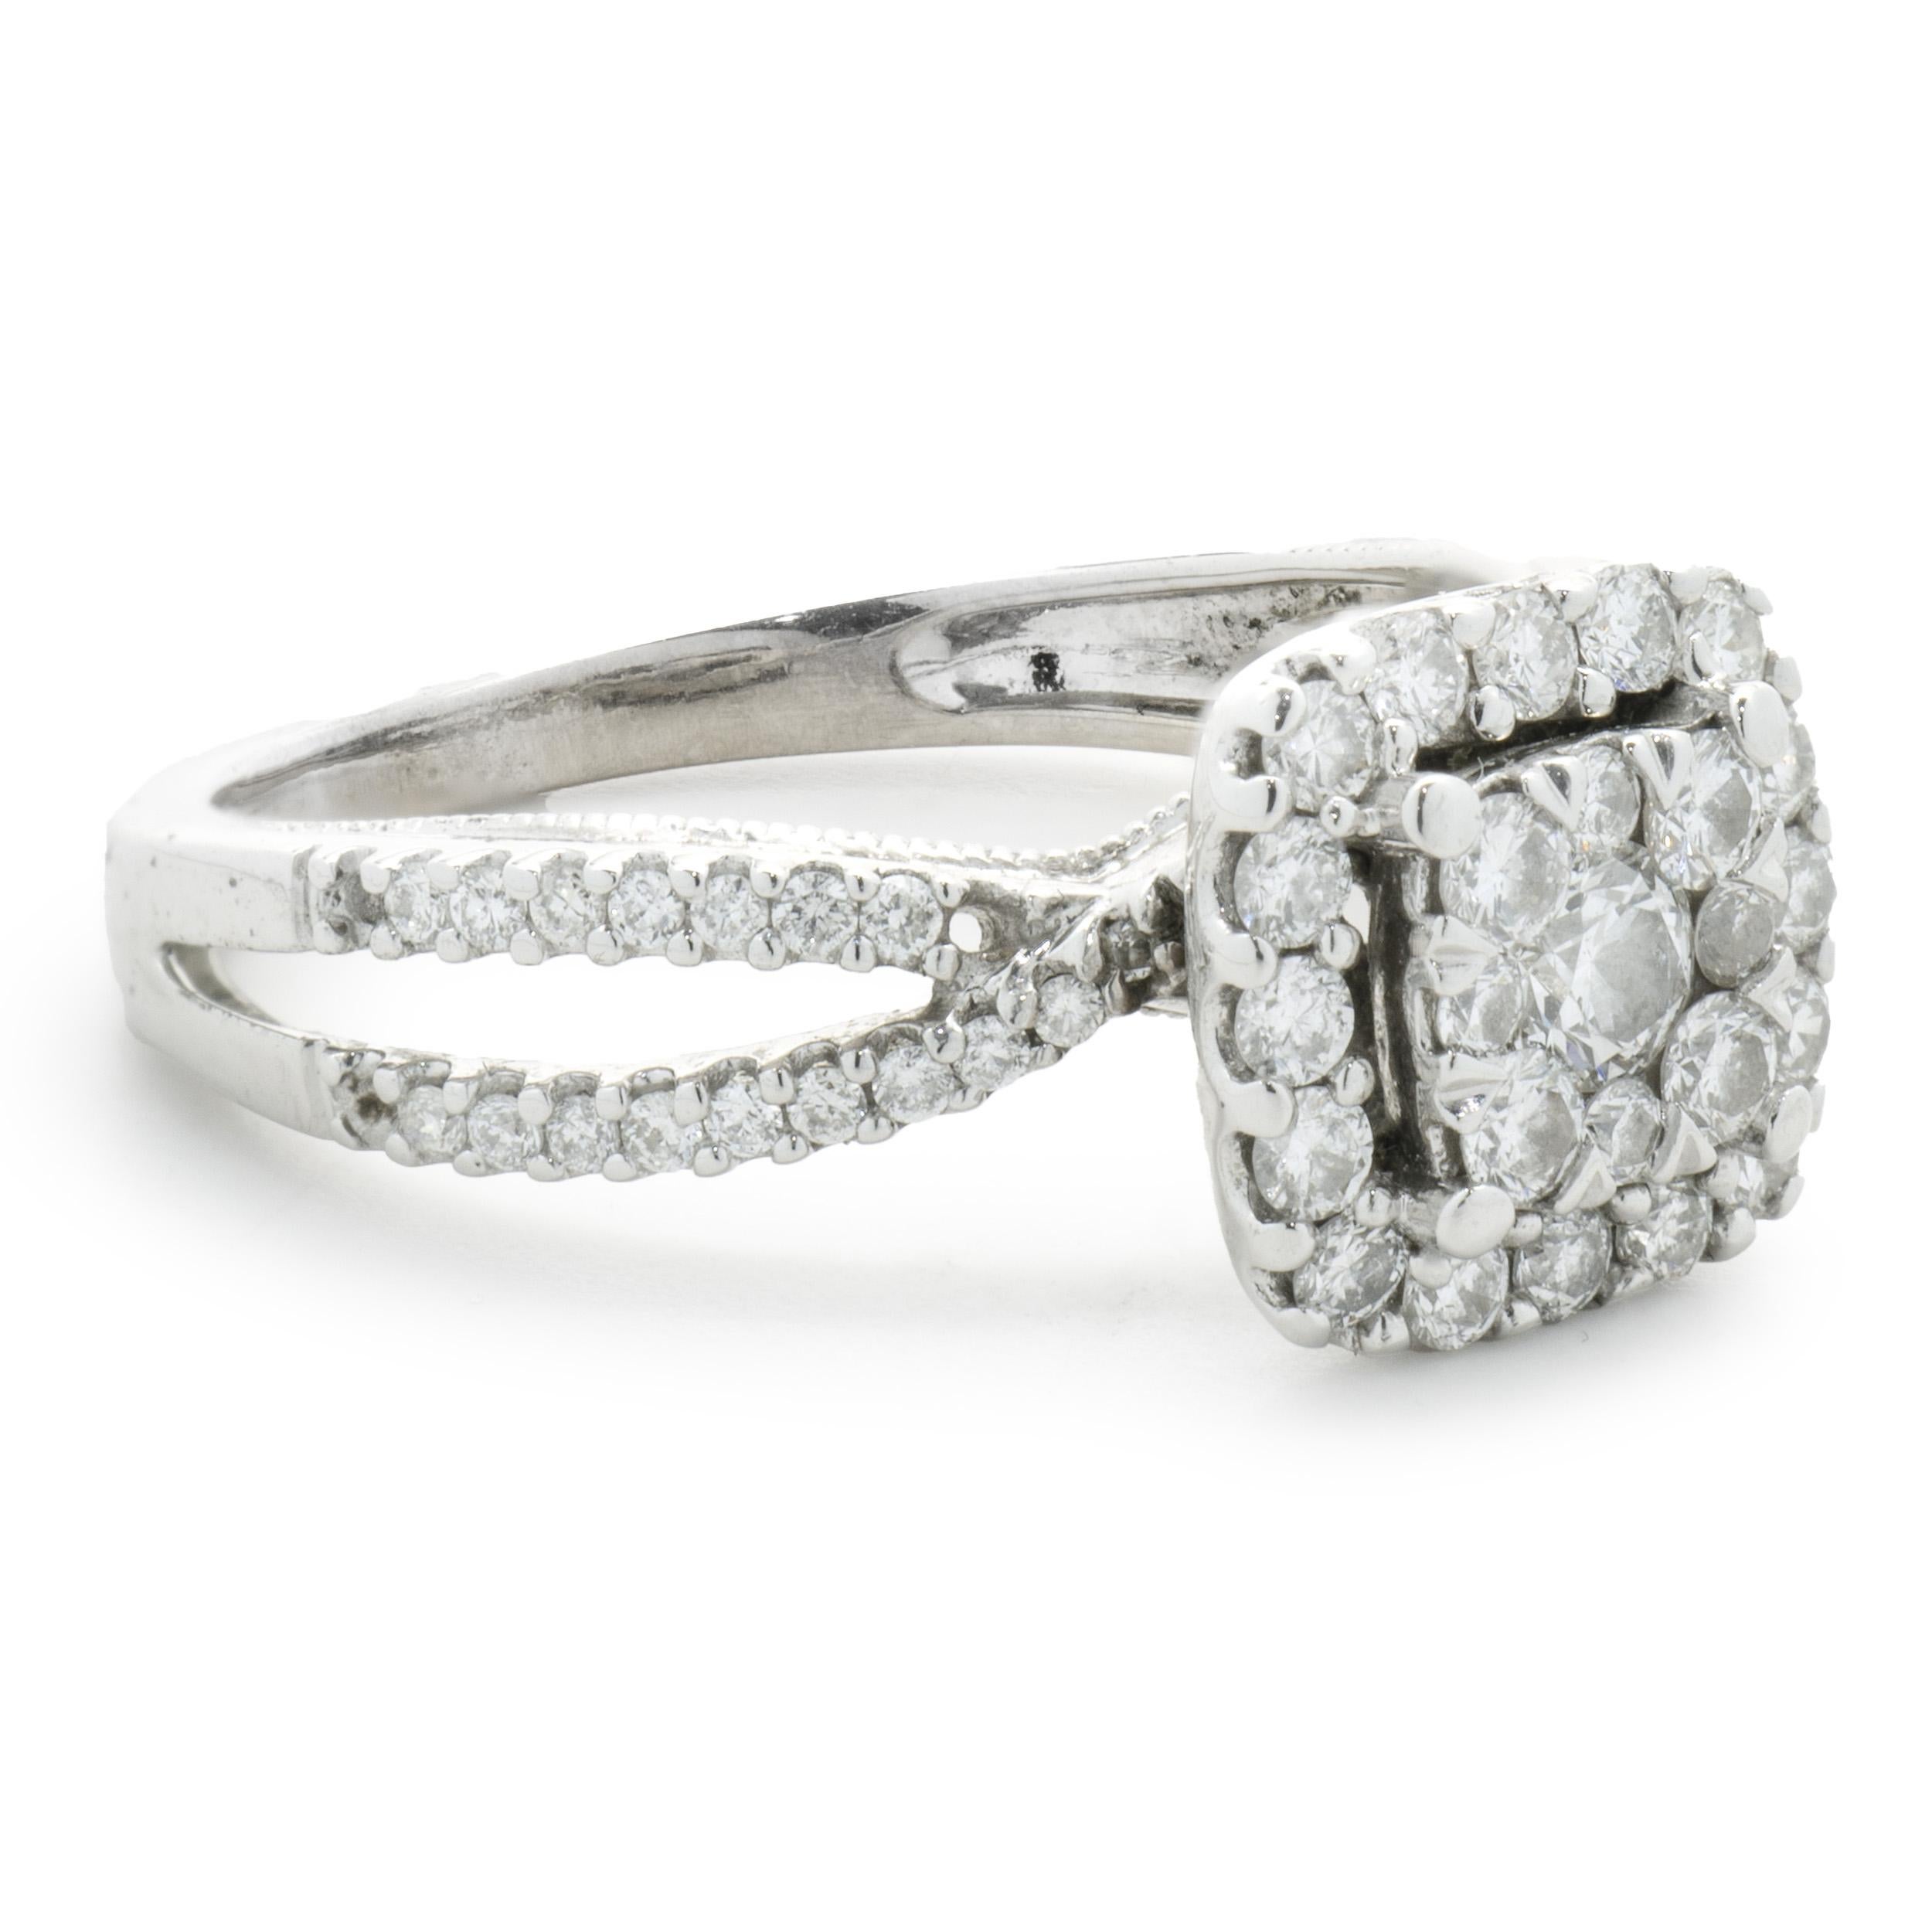 Designer: Custom
Material: 14K white gold
Diamond: 63 round brilliant cut = 1.02cttw
Color: H
Clarity: SI1
Dimensions: ring top measures 9mm wide
Ring Size: 5.25 (complimentary sizing available)
Weight: 2.84 grams